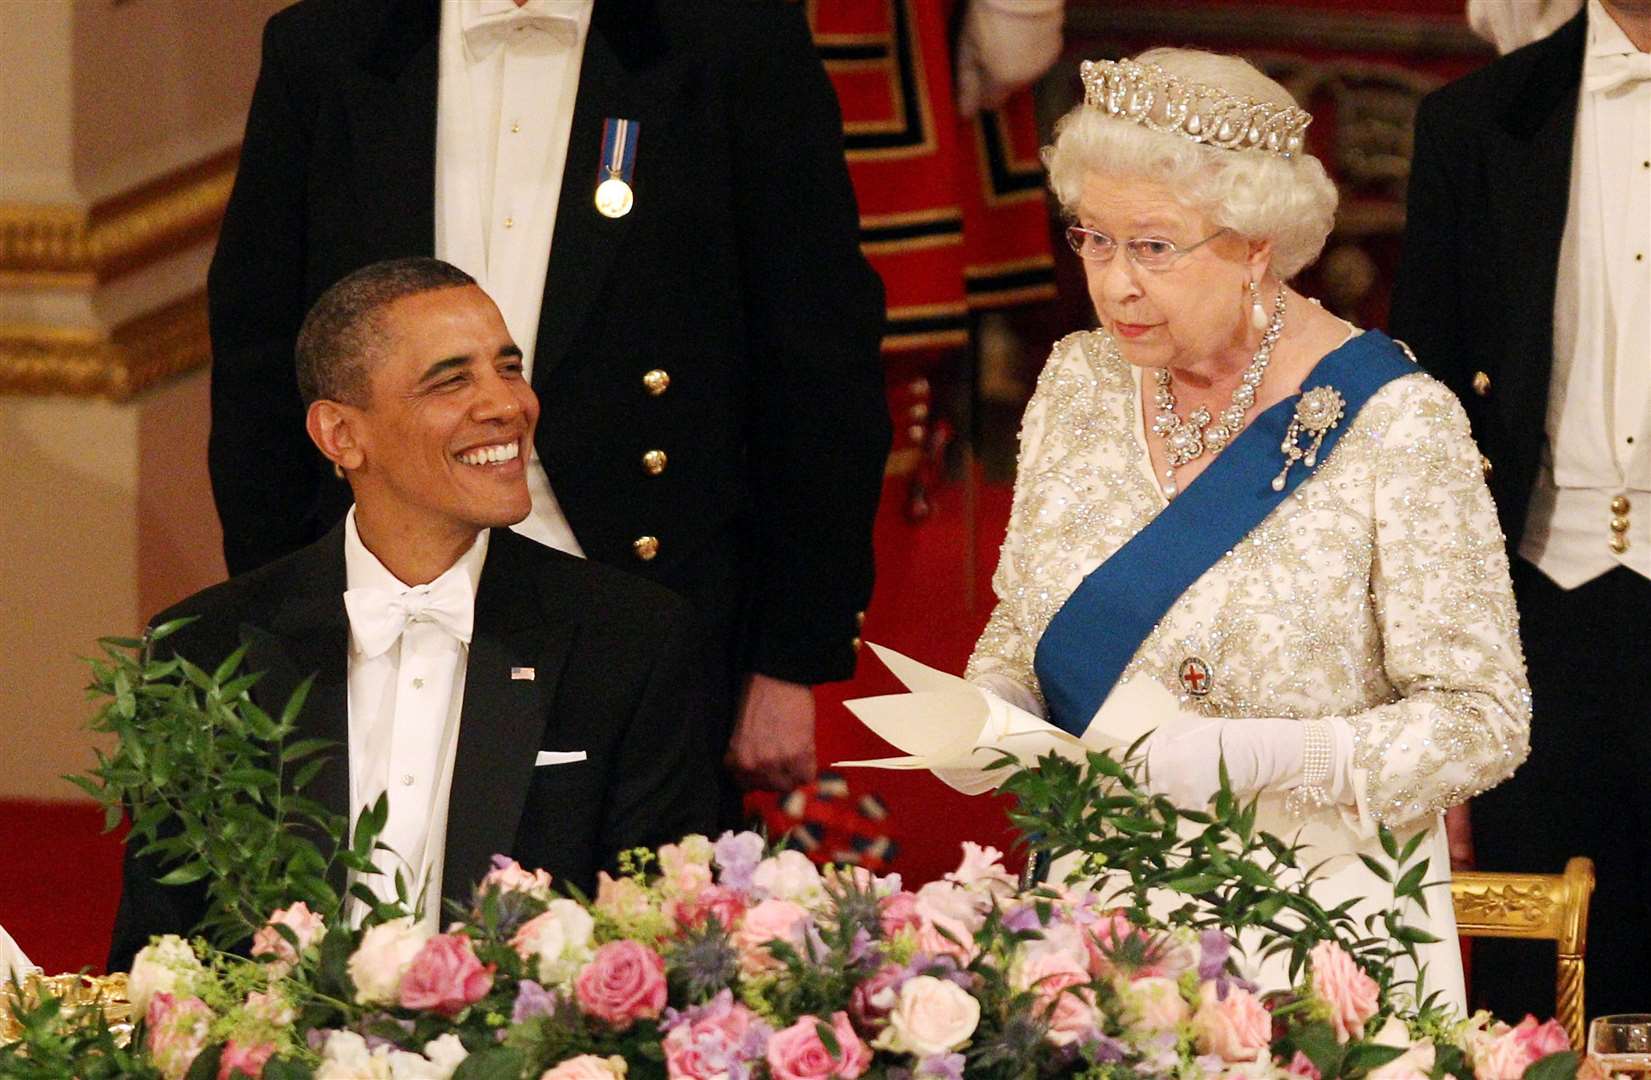 The Queen and then US President Barack Obama at a Buckingham Palace State Banquet (PA)